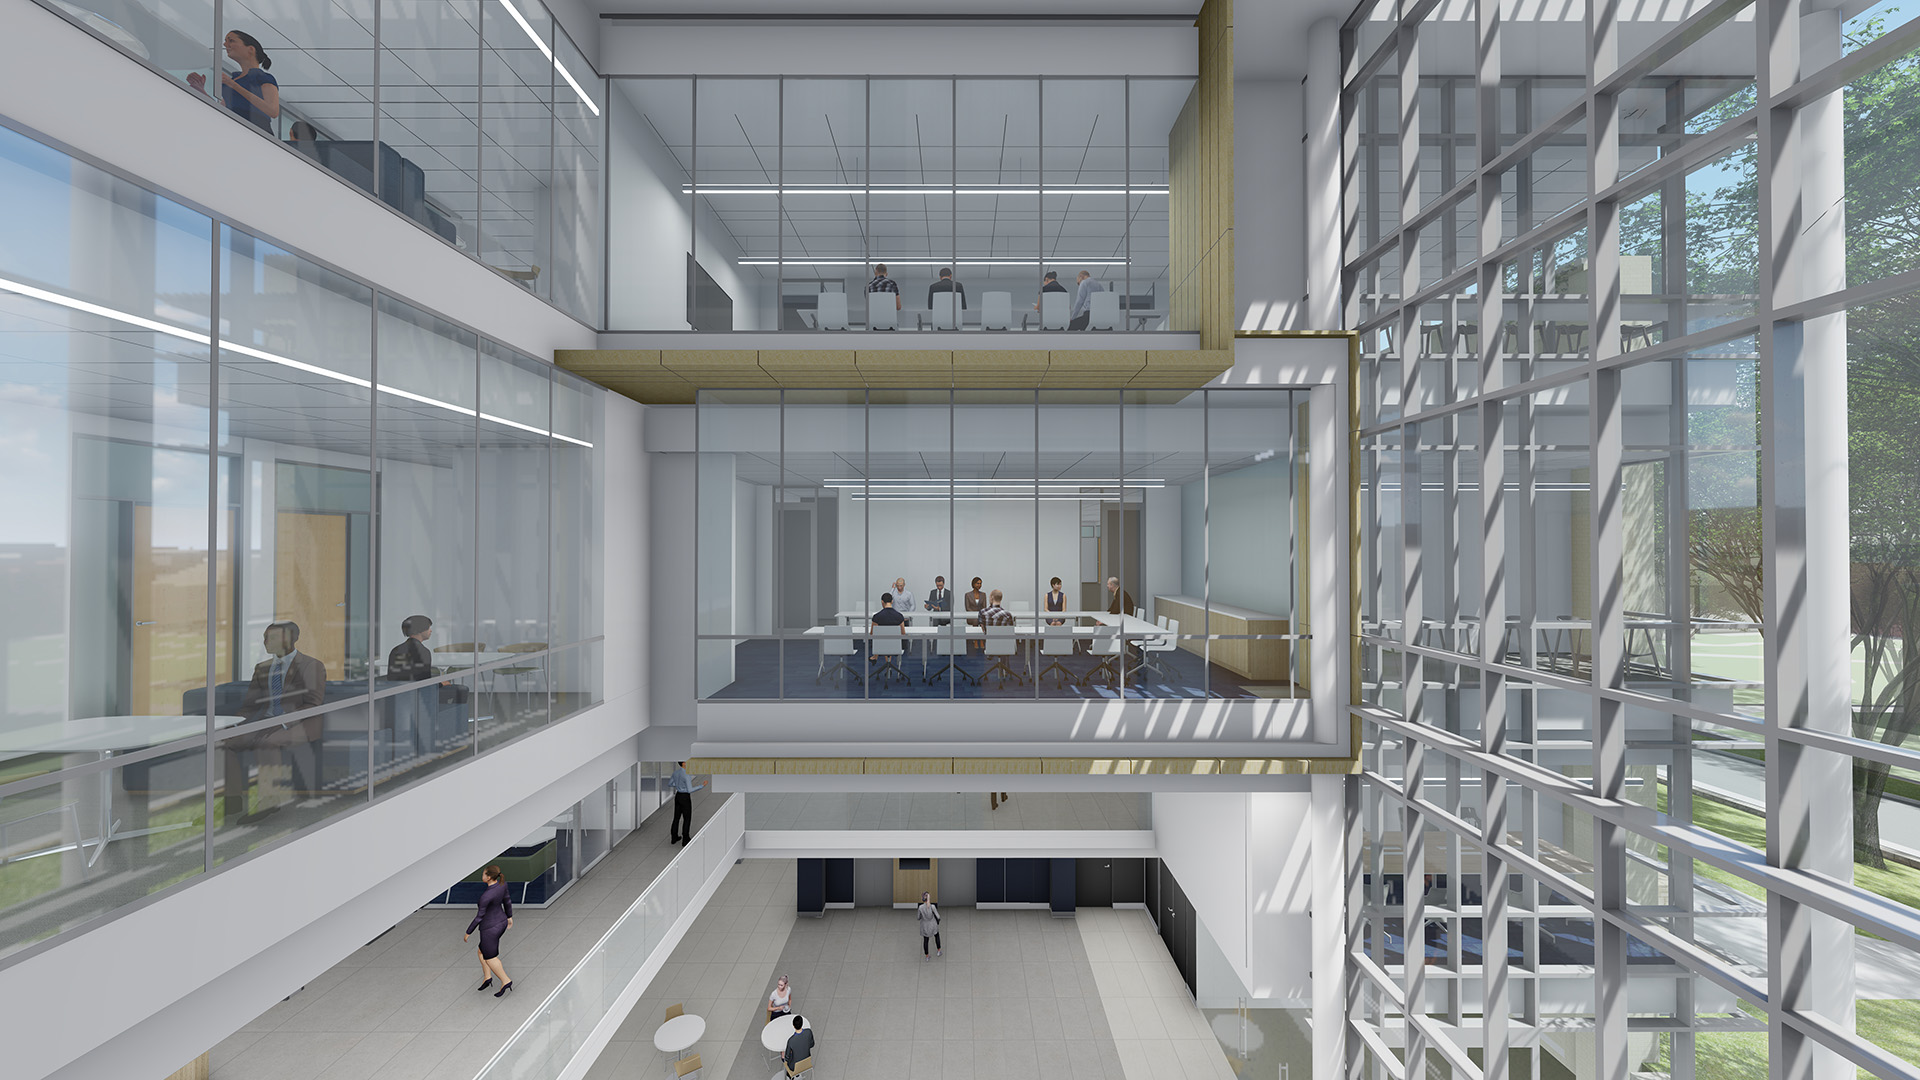 Scovell Hall's new atrium will serve as a centralized hub for community.